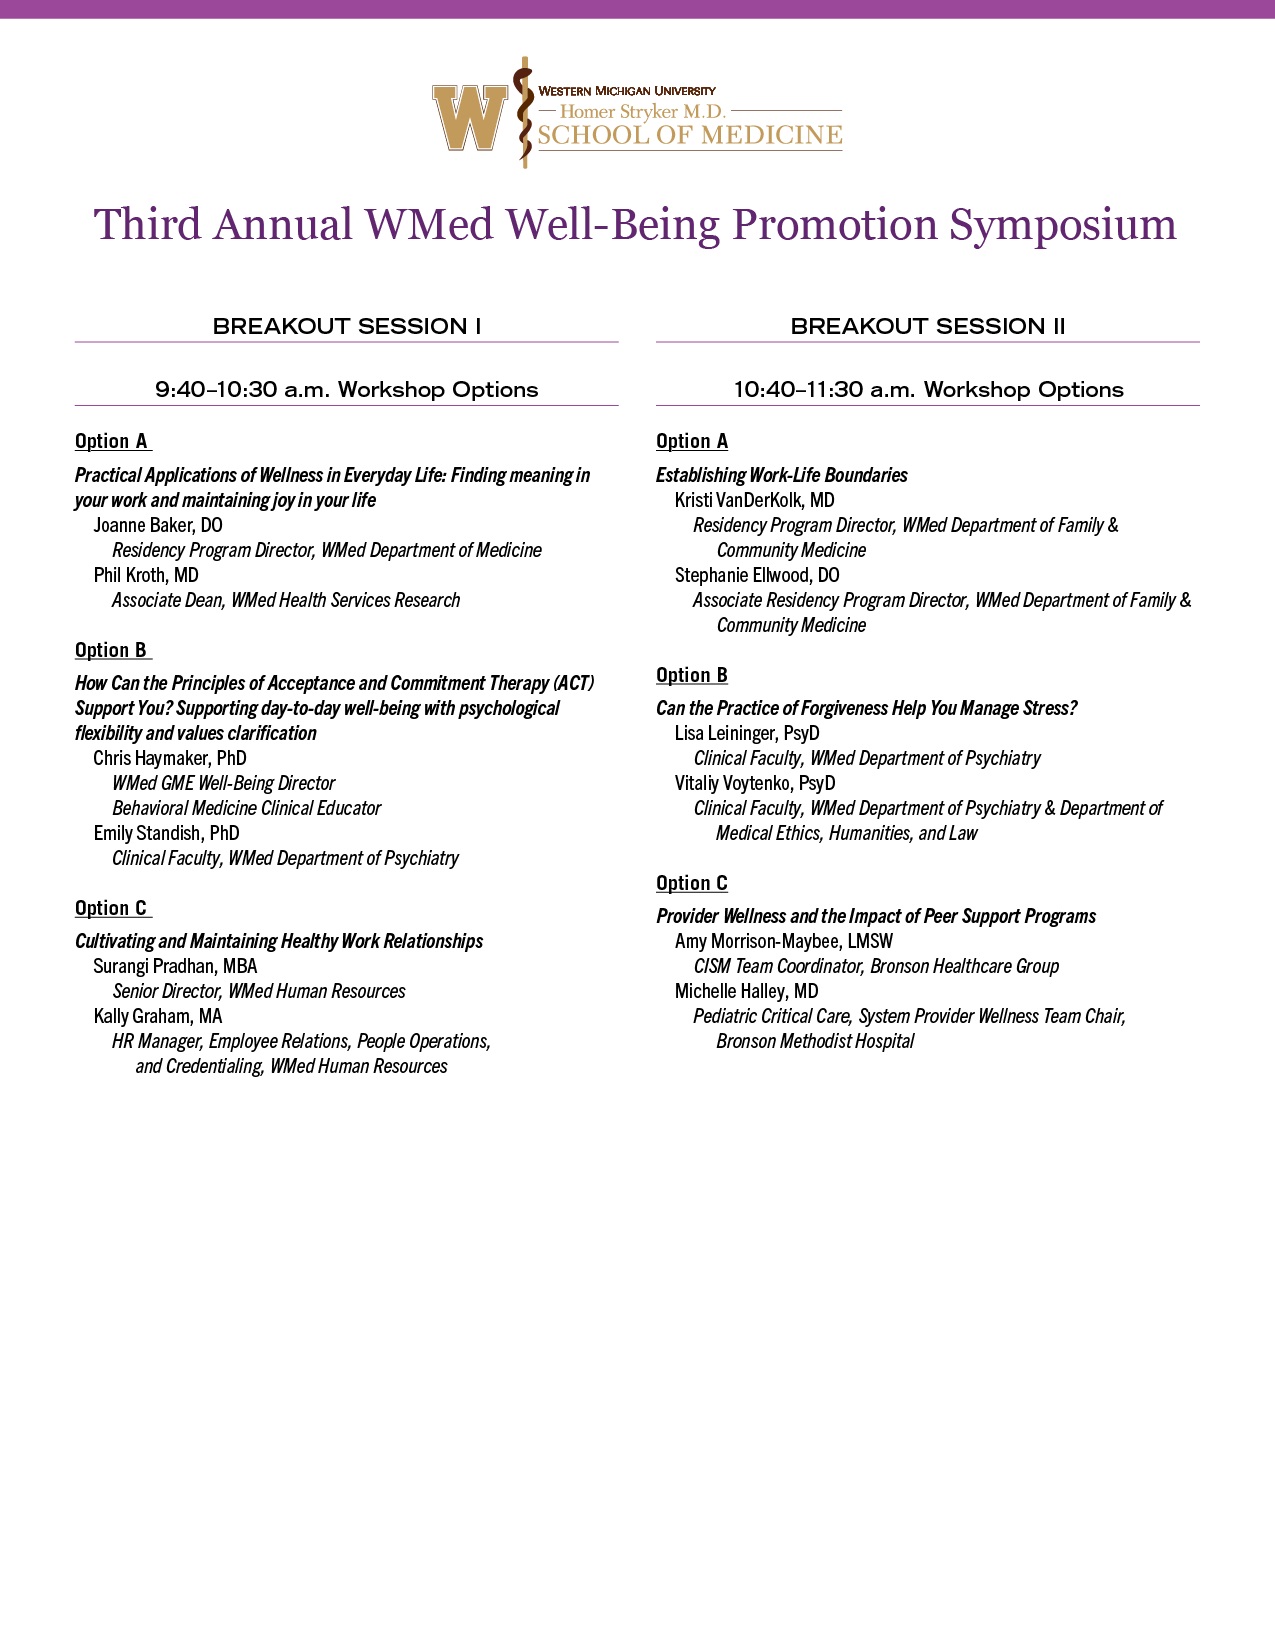 Third Annual WMed Well-Being Promotion Symposium Program Page 2